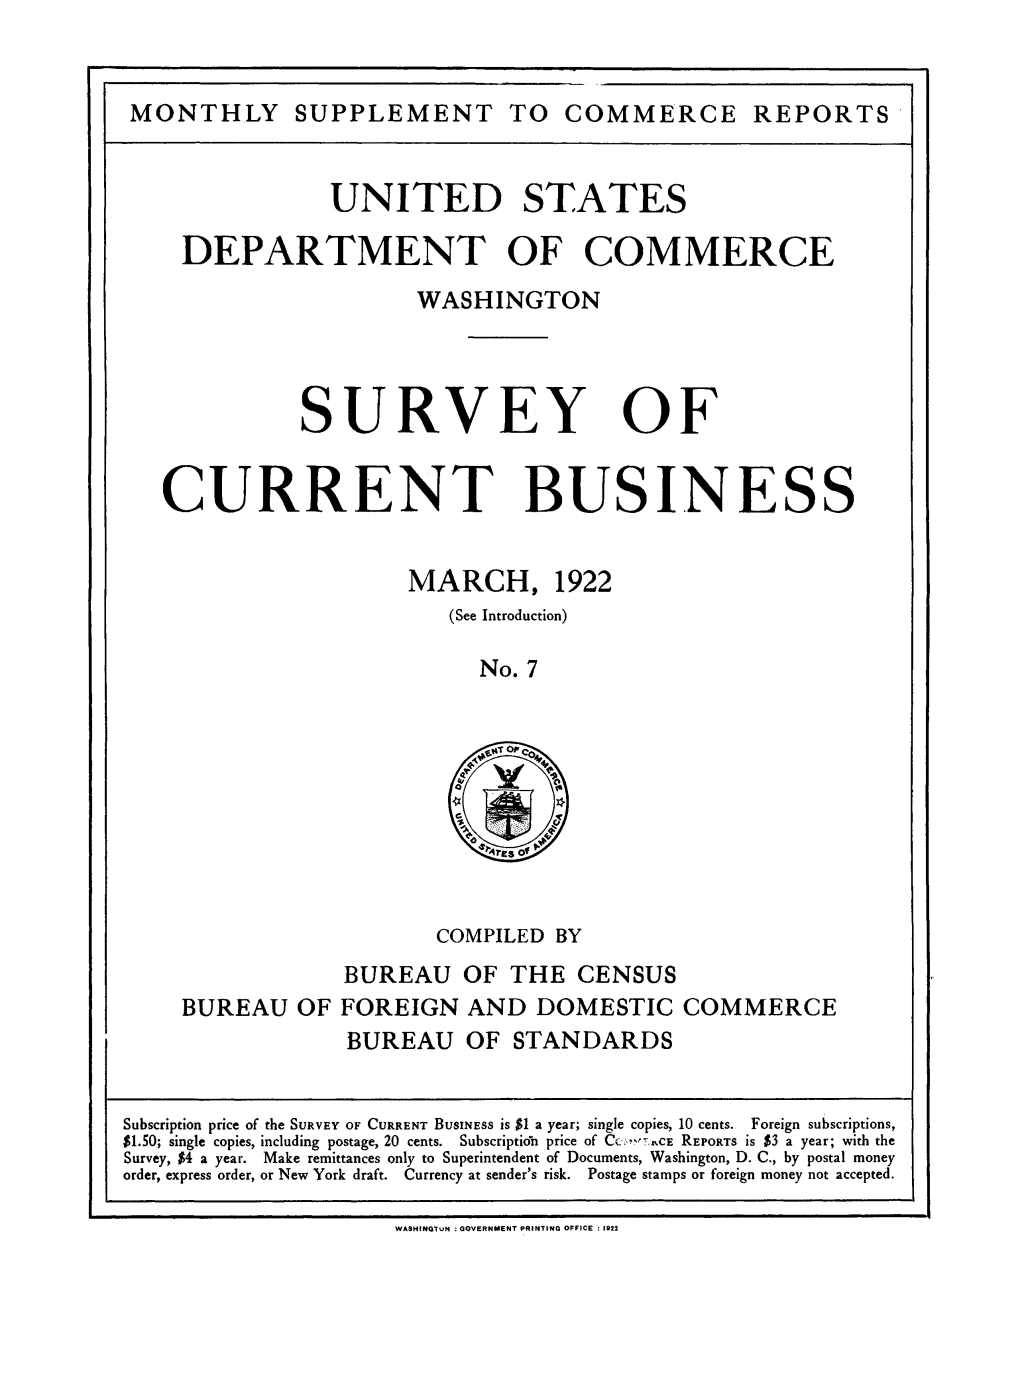 Survey of Current Business March 1922